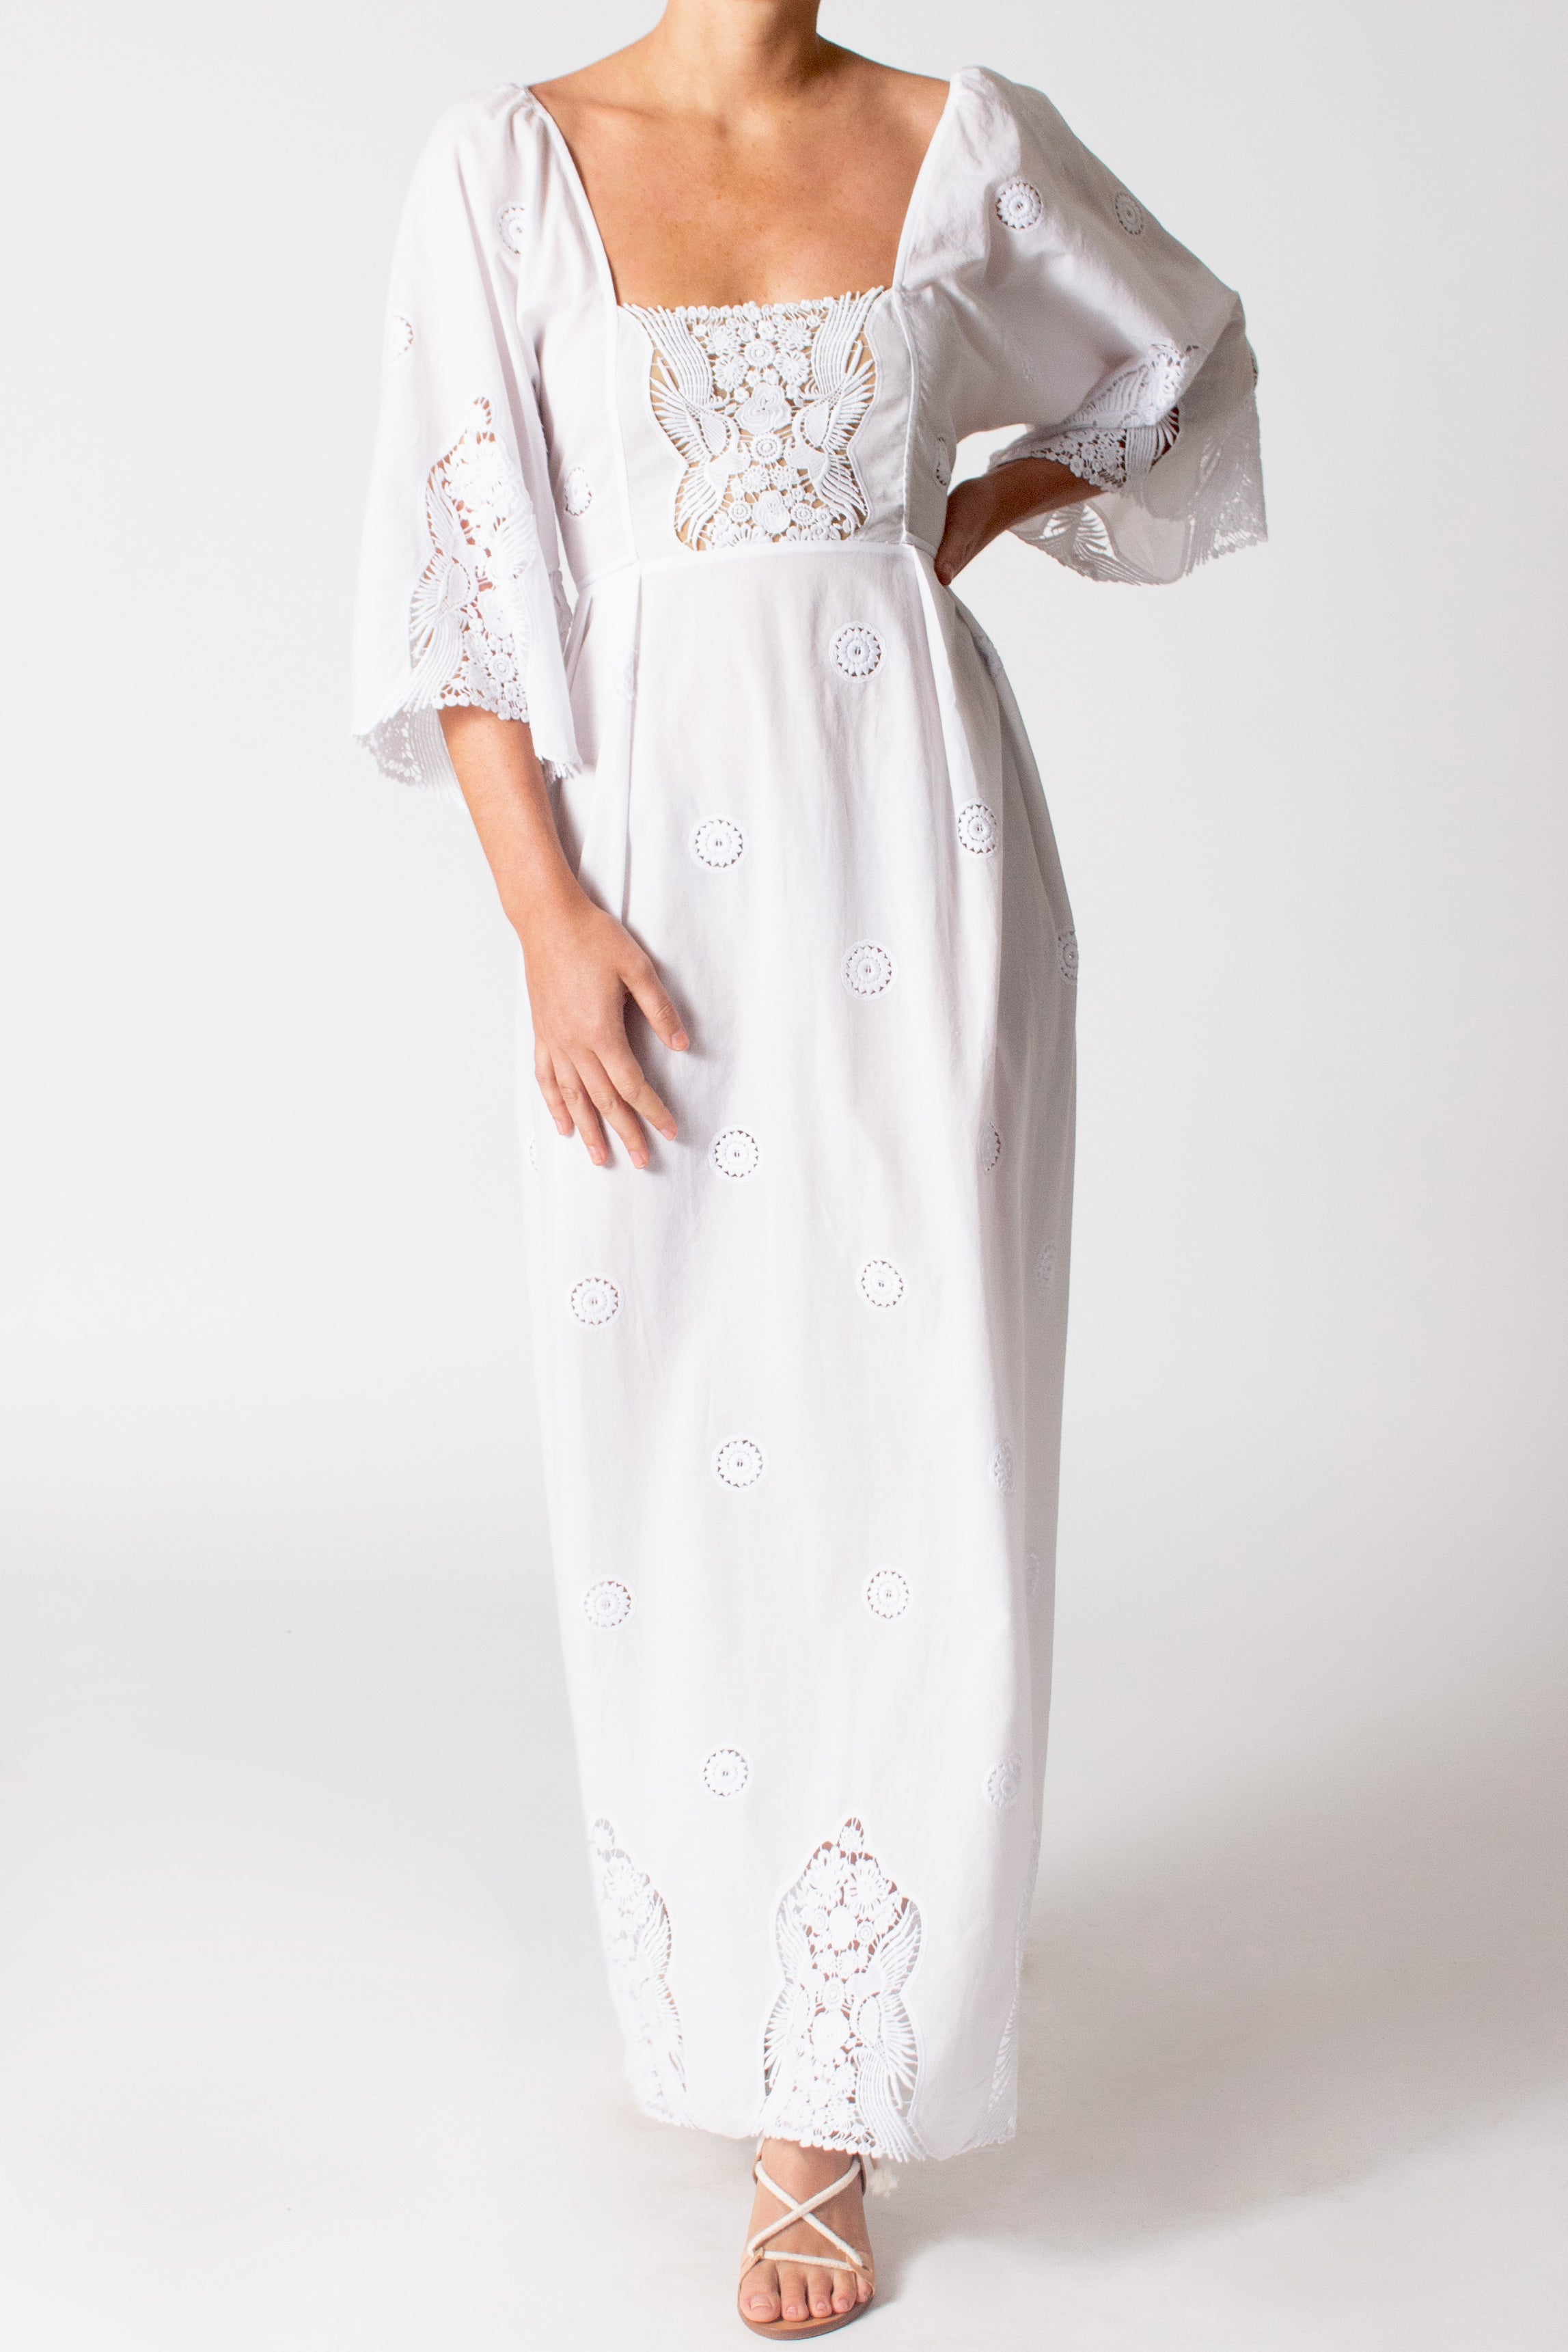 Meredith Falcon Embroidery Dress by Miguelina